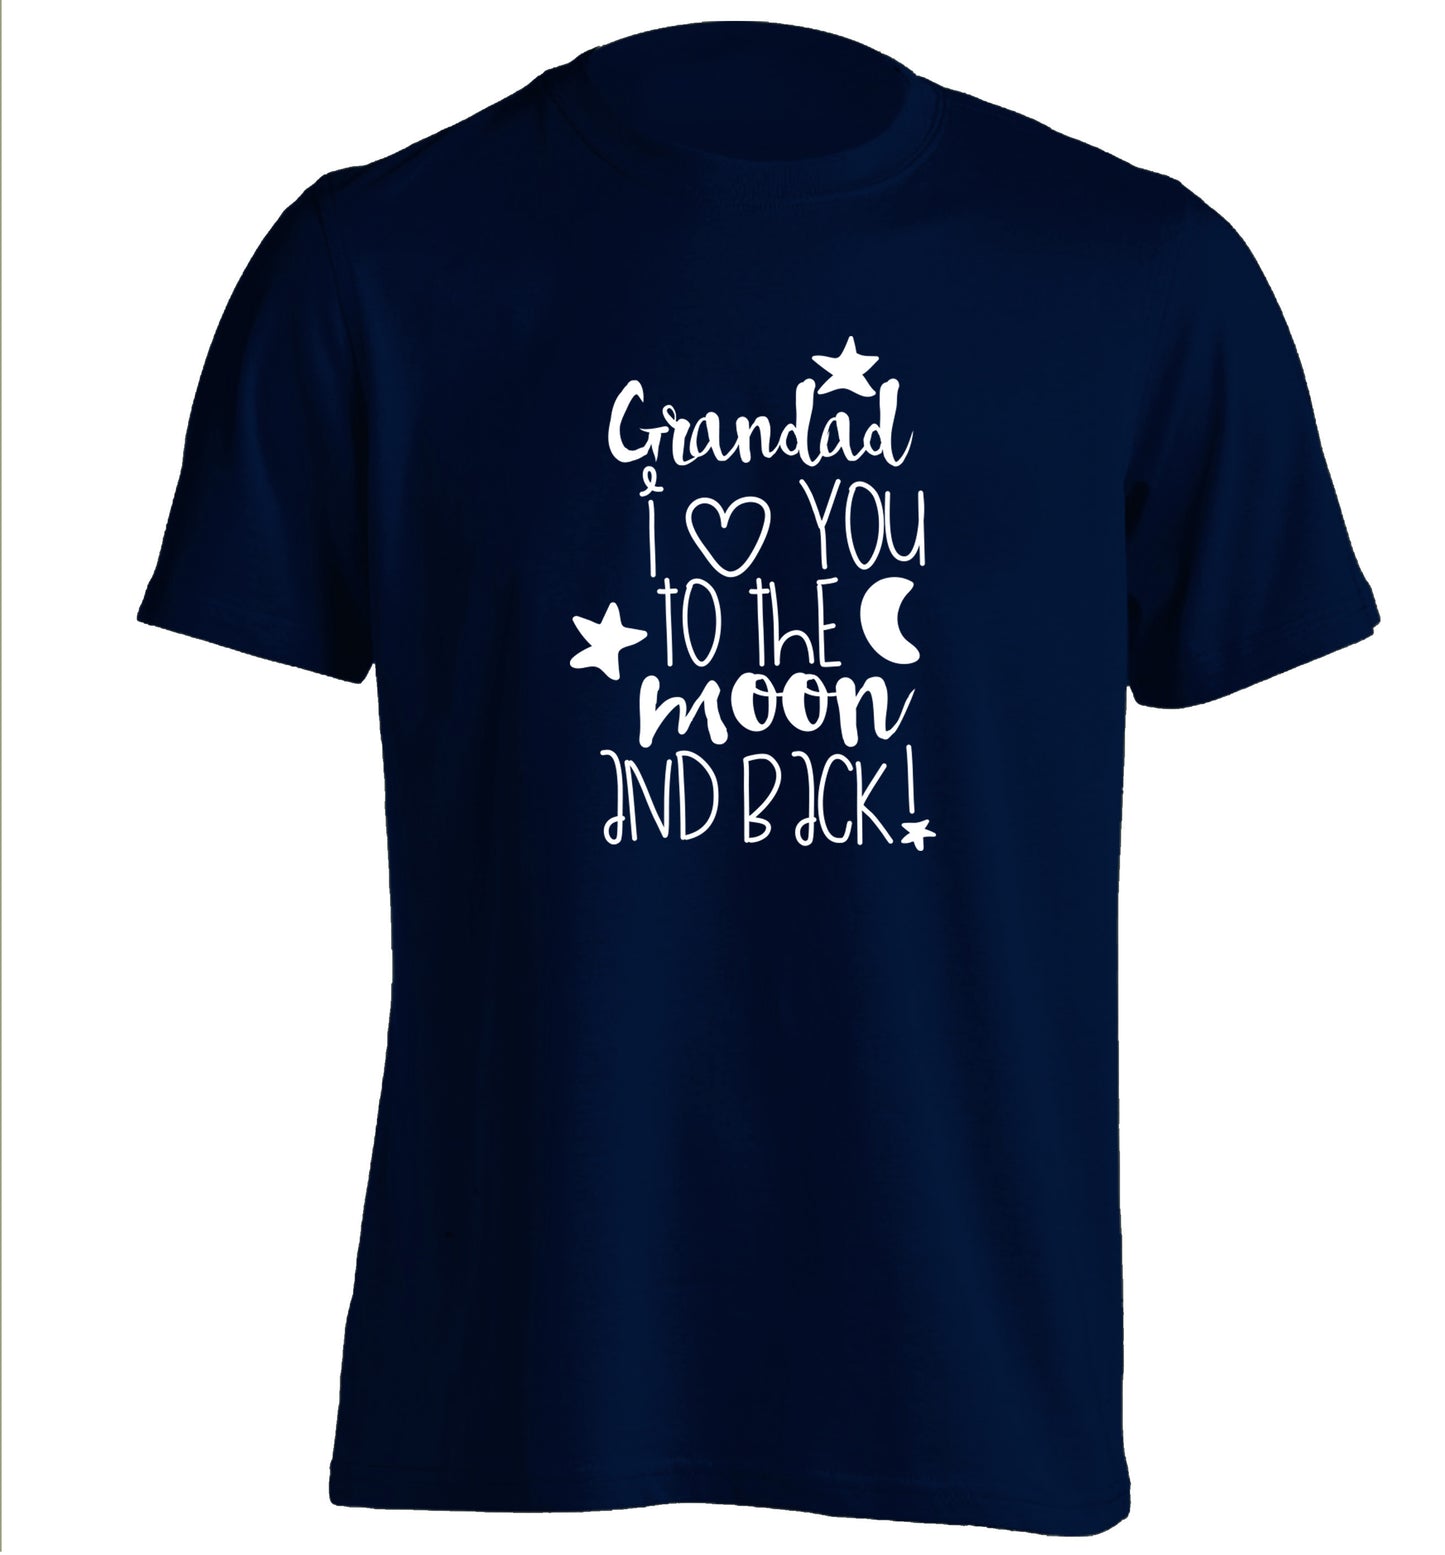 Grandad's I love you to the moon and back adults unisex navy Tshirt 2XL